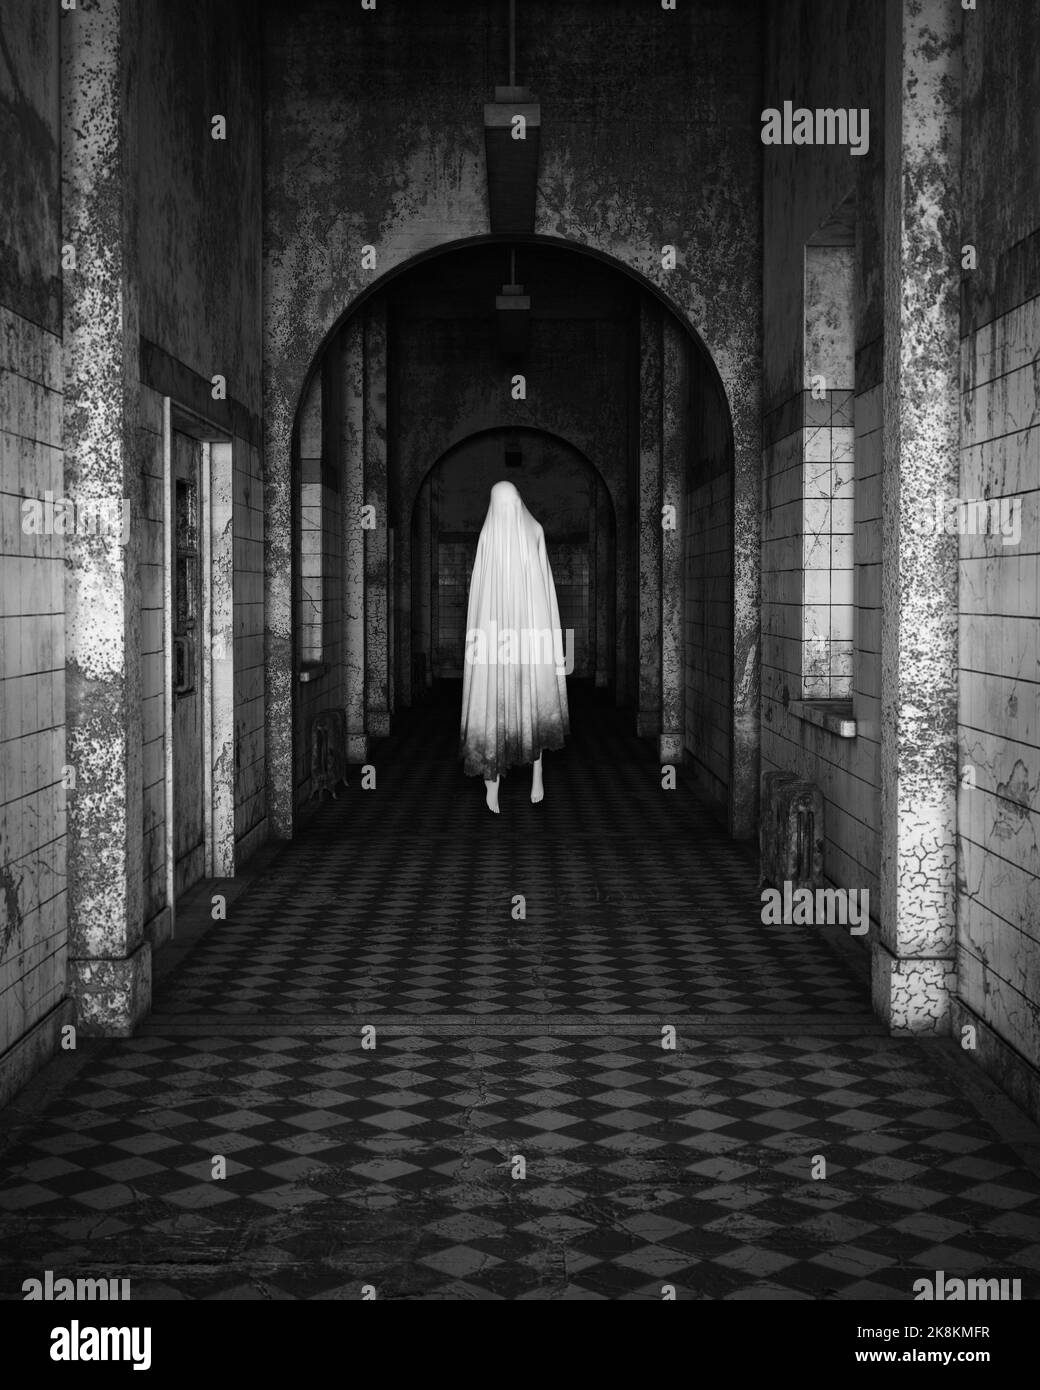 Floating Ghost in a Asylum Halloween Dark Black and White Film Grain Analogue Aesthetic Gothic Building with Ghost Hunters Camera Flash 3d Stock Photo